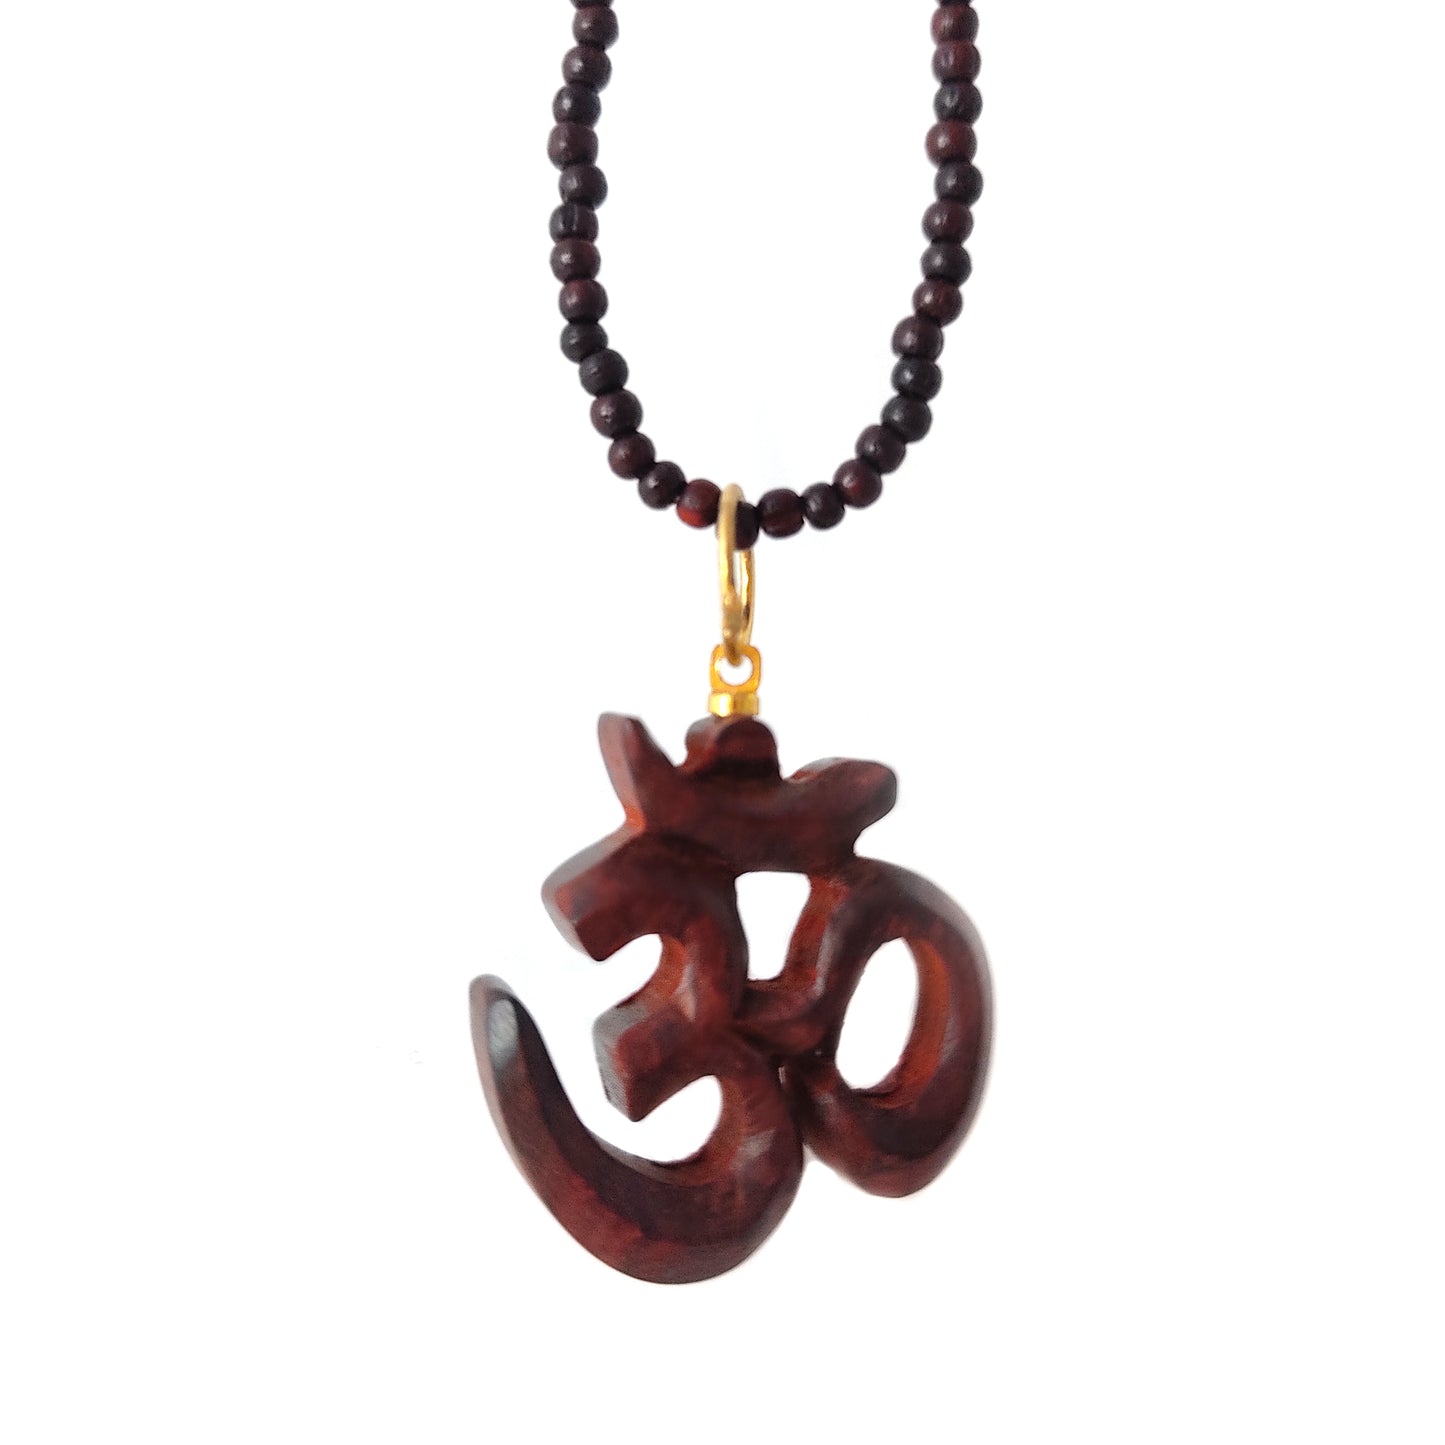 Om Pendant Necklace - Spiritual Rosewood Beads Necklace Perfect Yoga Gift 18"